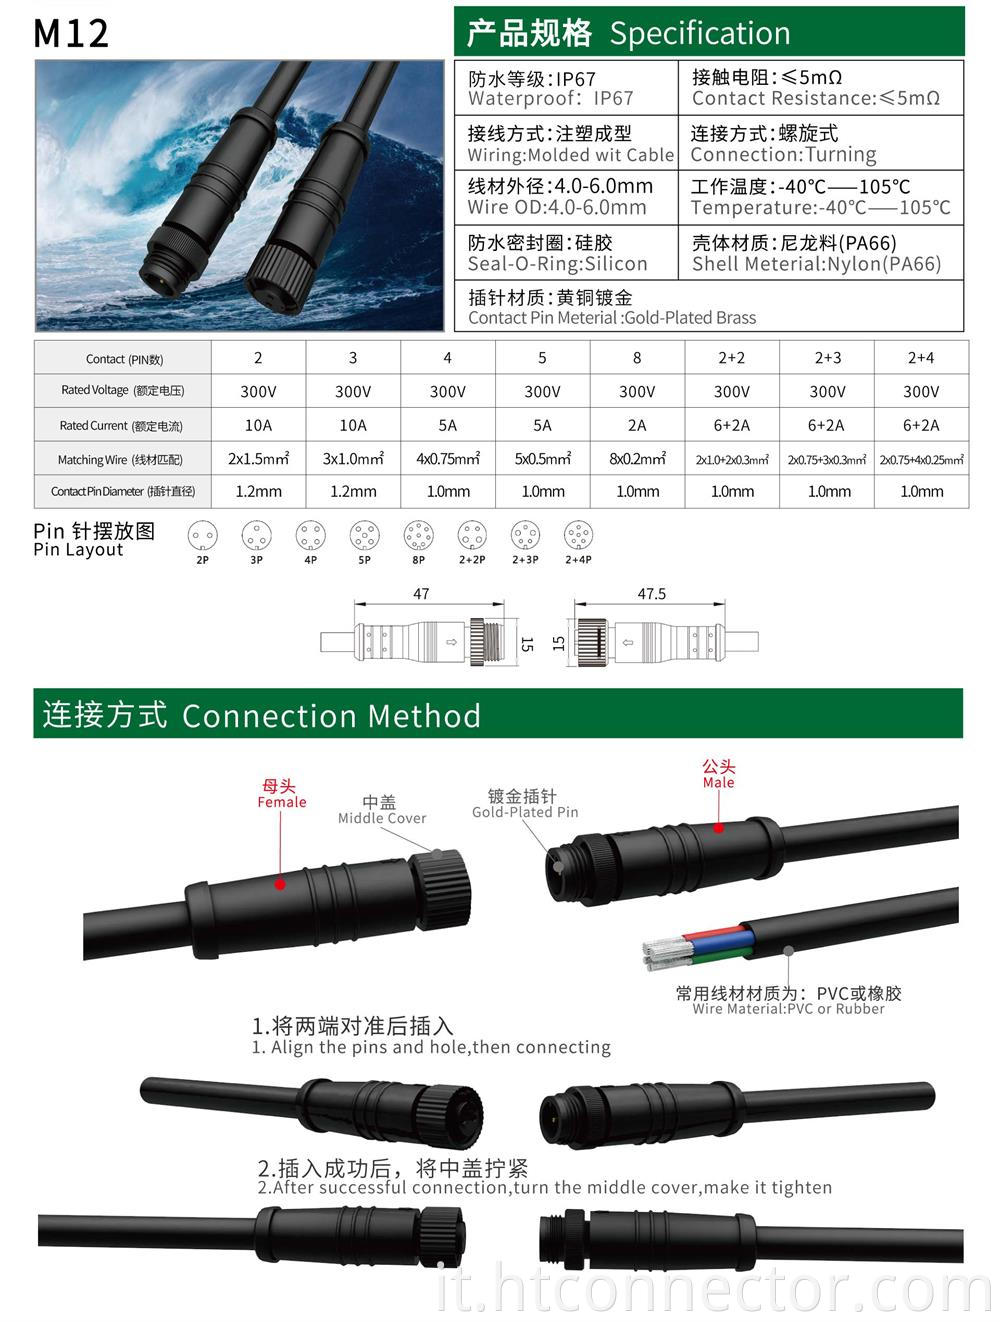 High current waterproof connector